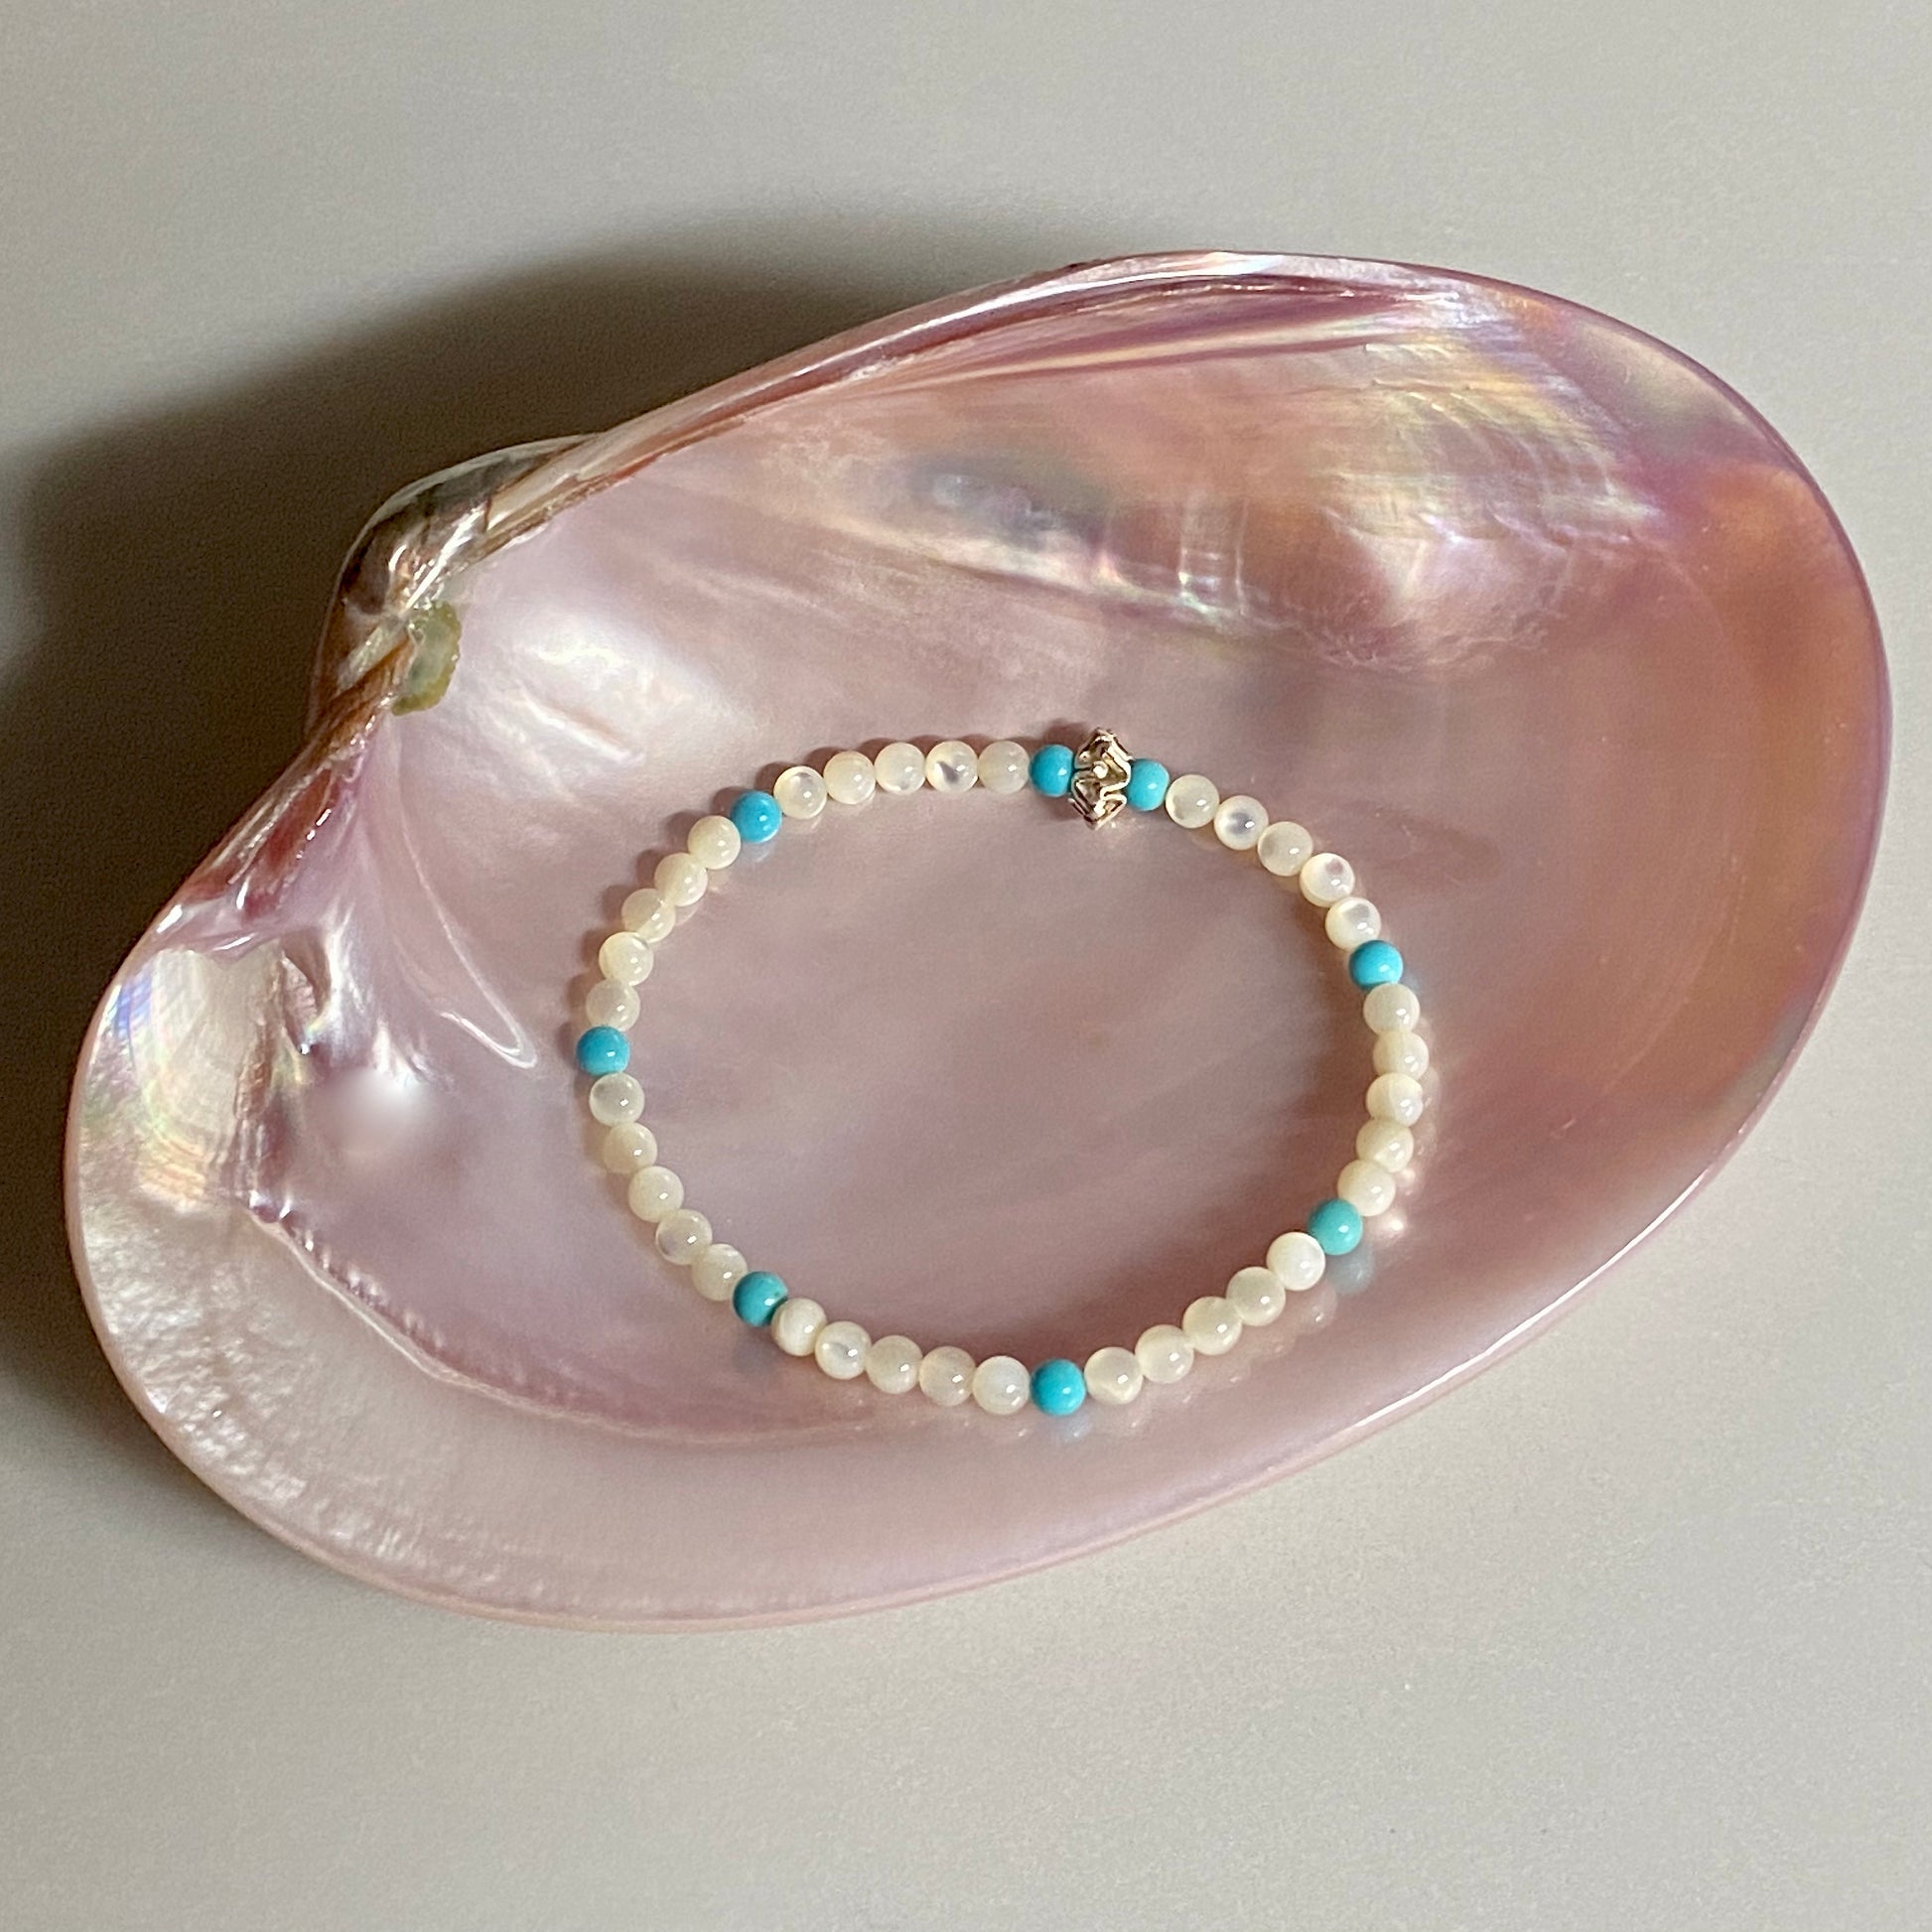 Between the Cominos white mother of pearl & sleeping beauty turquoise beachlove stretch bracelet by Kimberly Arpaia